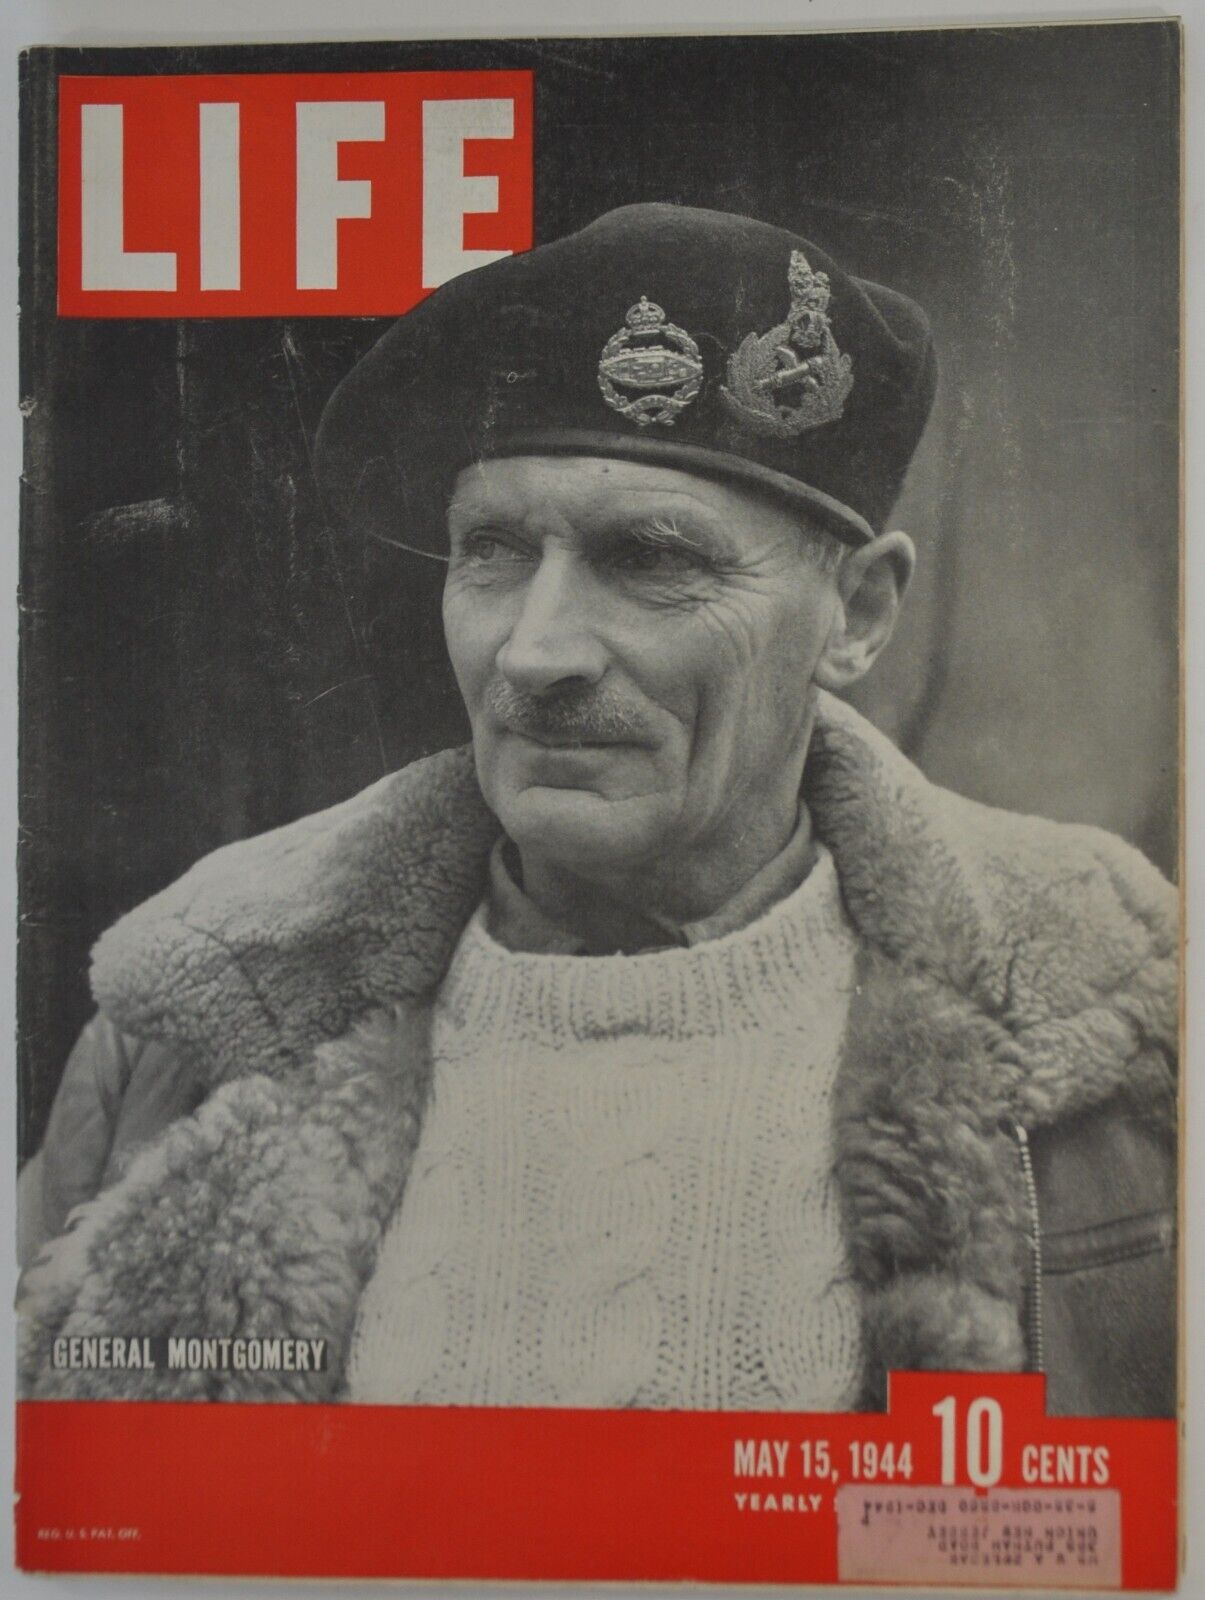 LIFE MAGAZINE MAY 15th, 1944 GENERAL MONTGOMERY